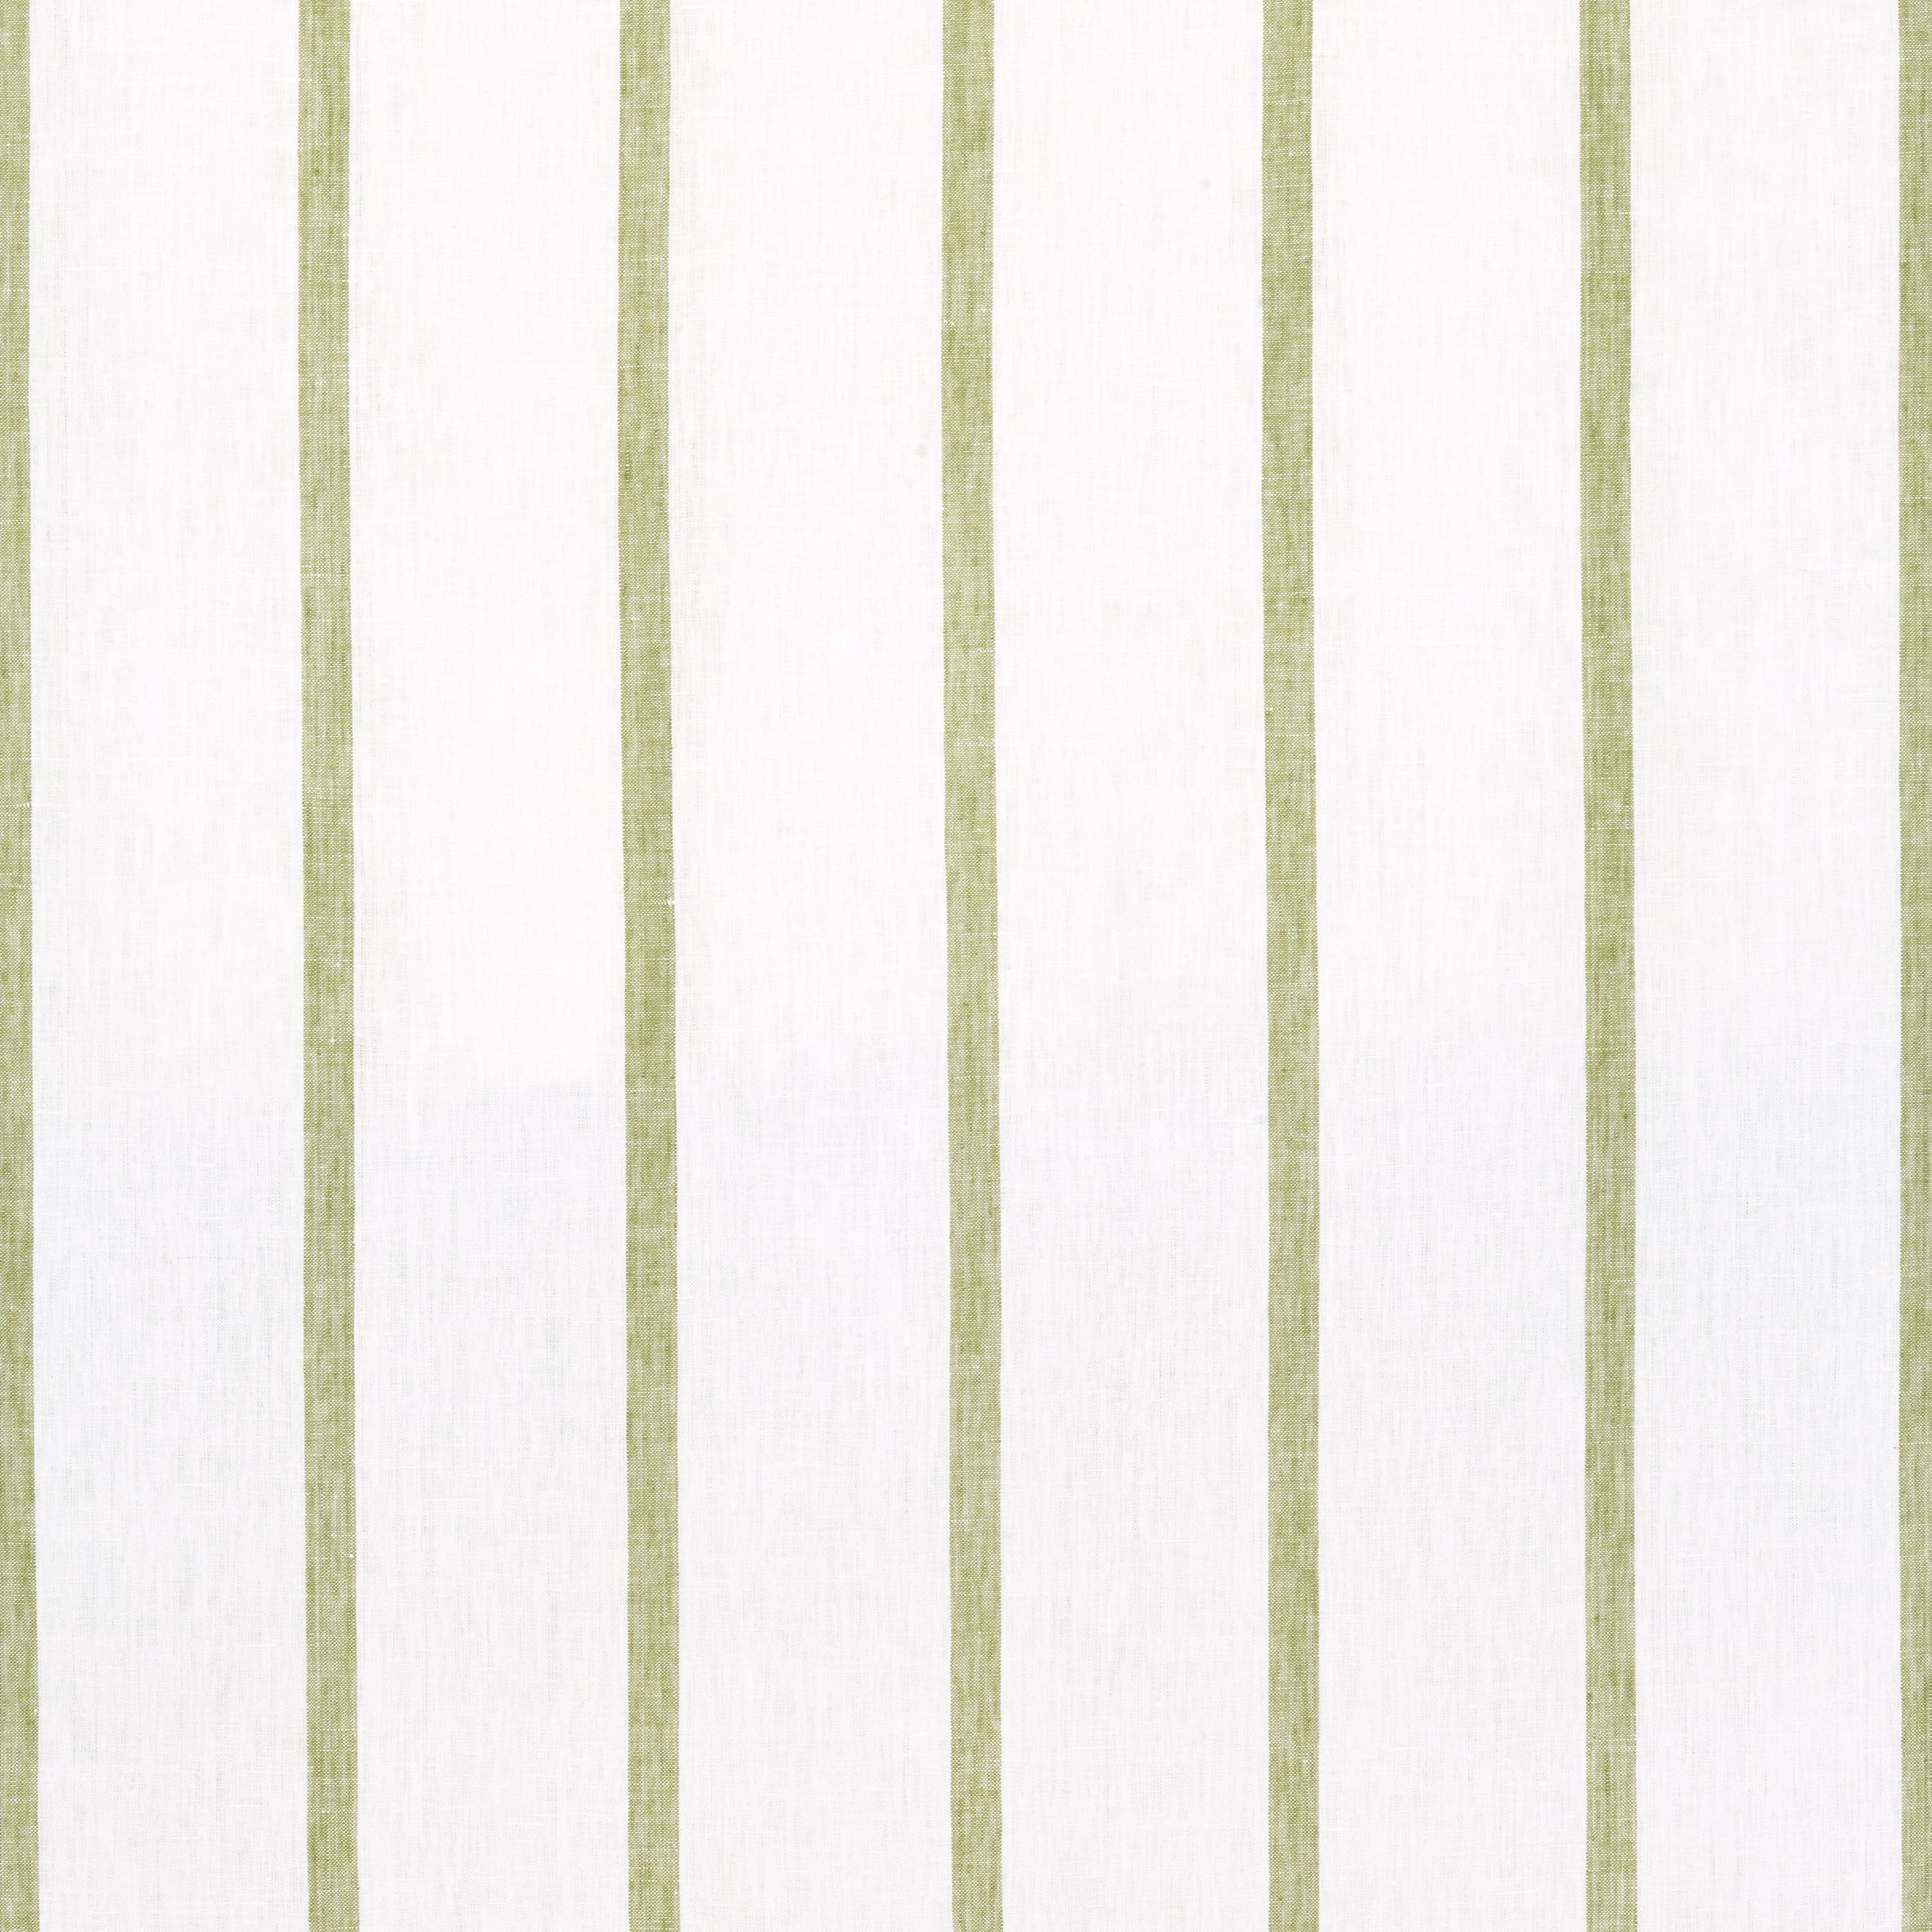 Sailing Stripe fabric in green and white color - pattern number AW15132 - by Anna French in the Antilles collection